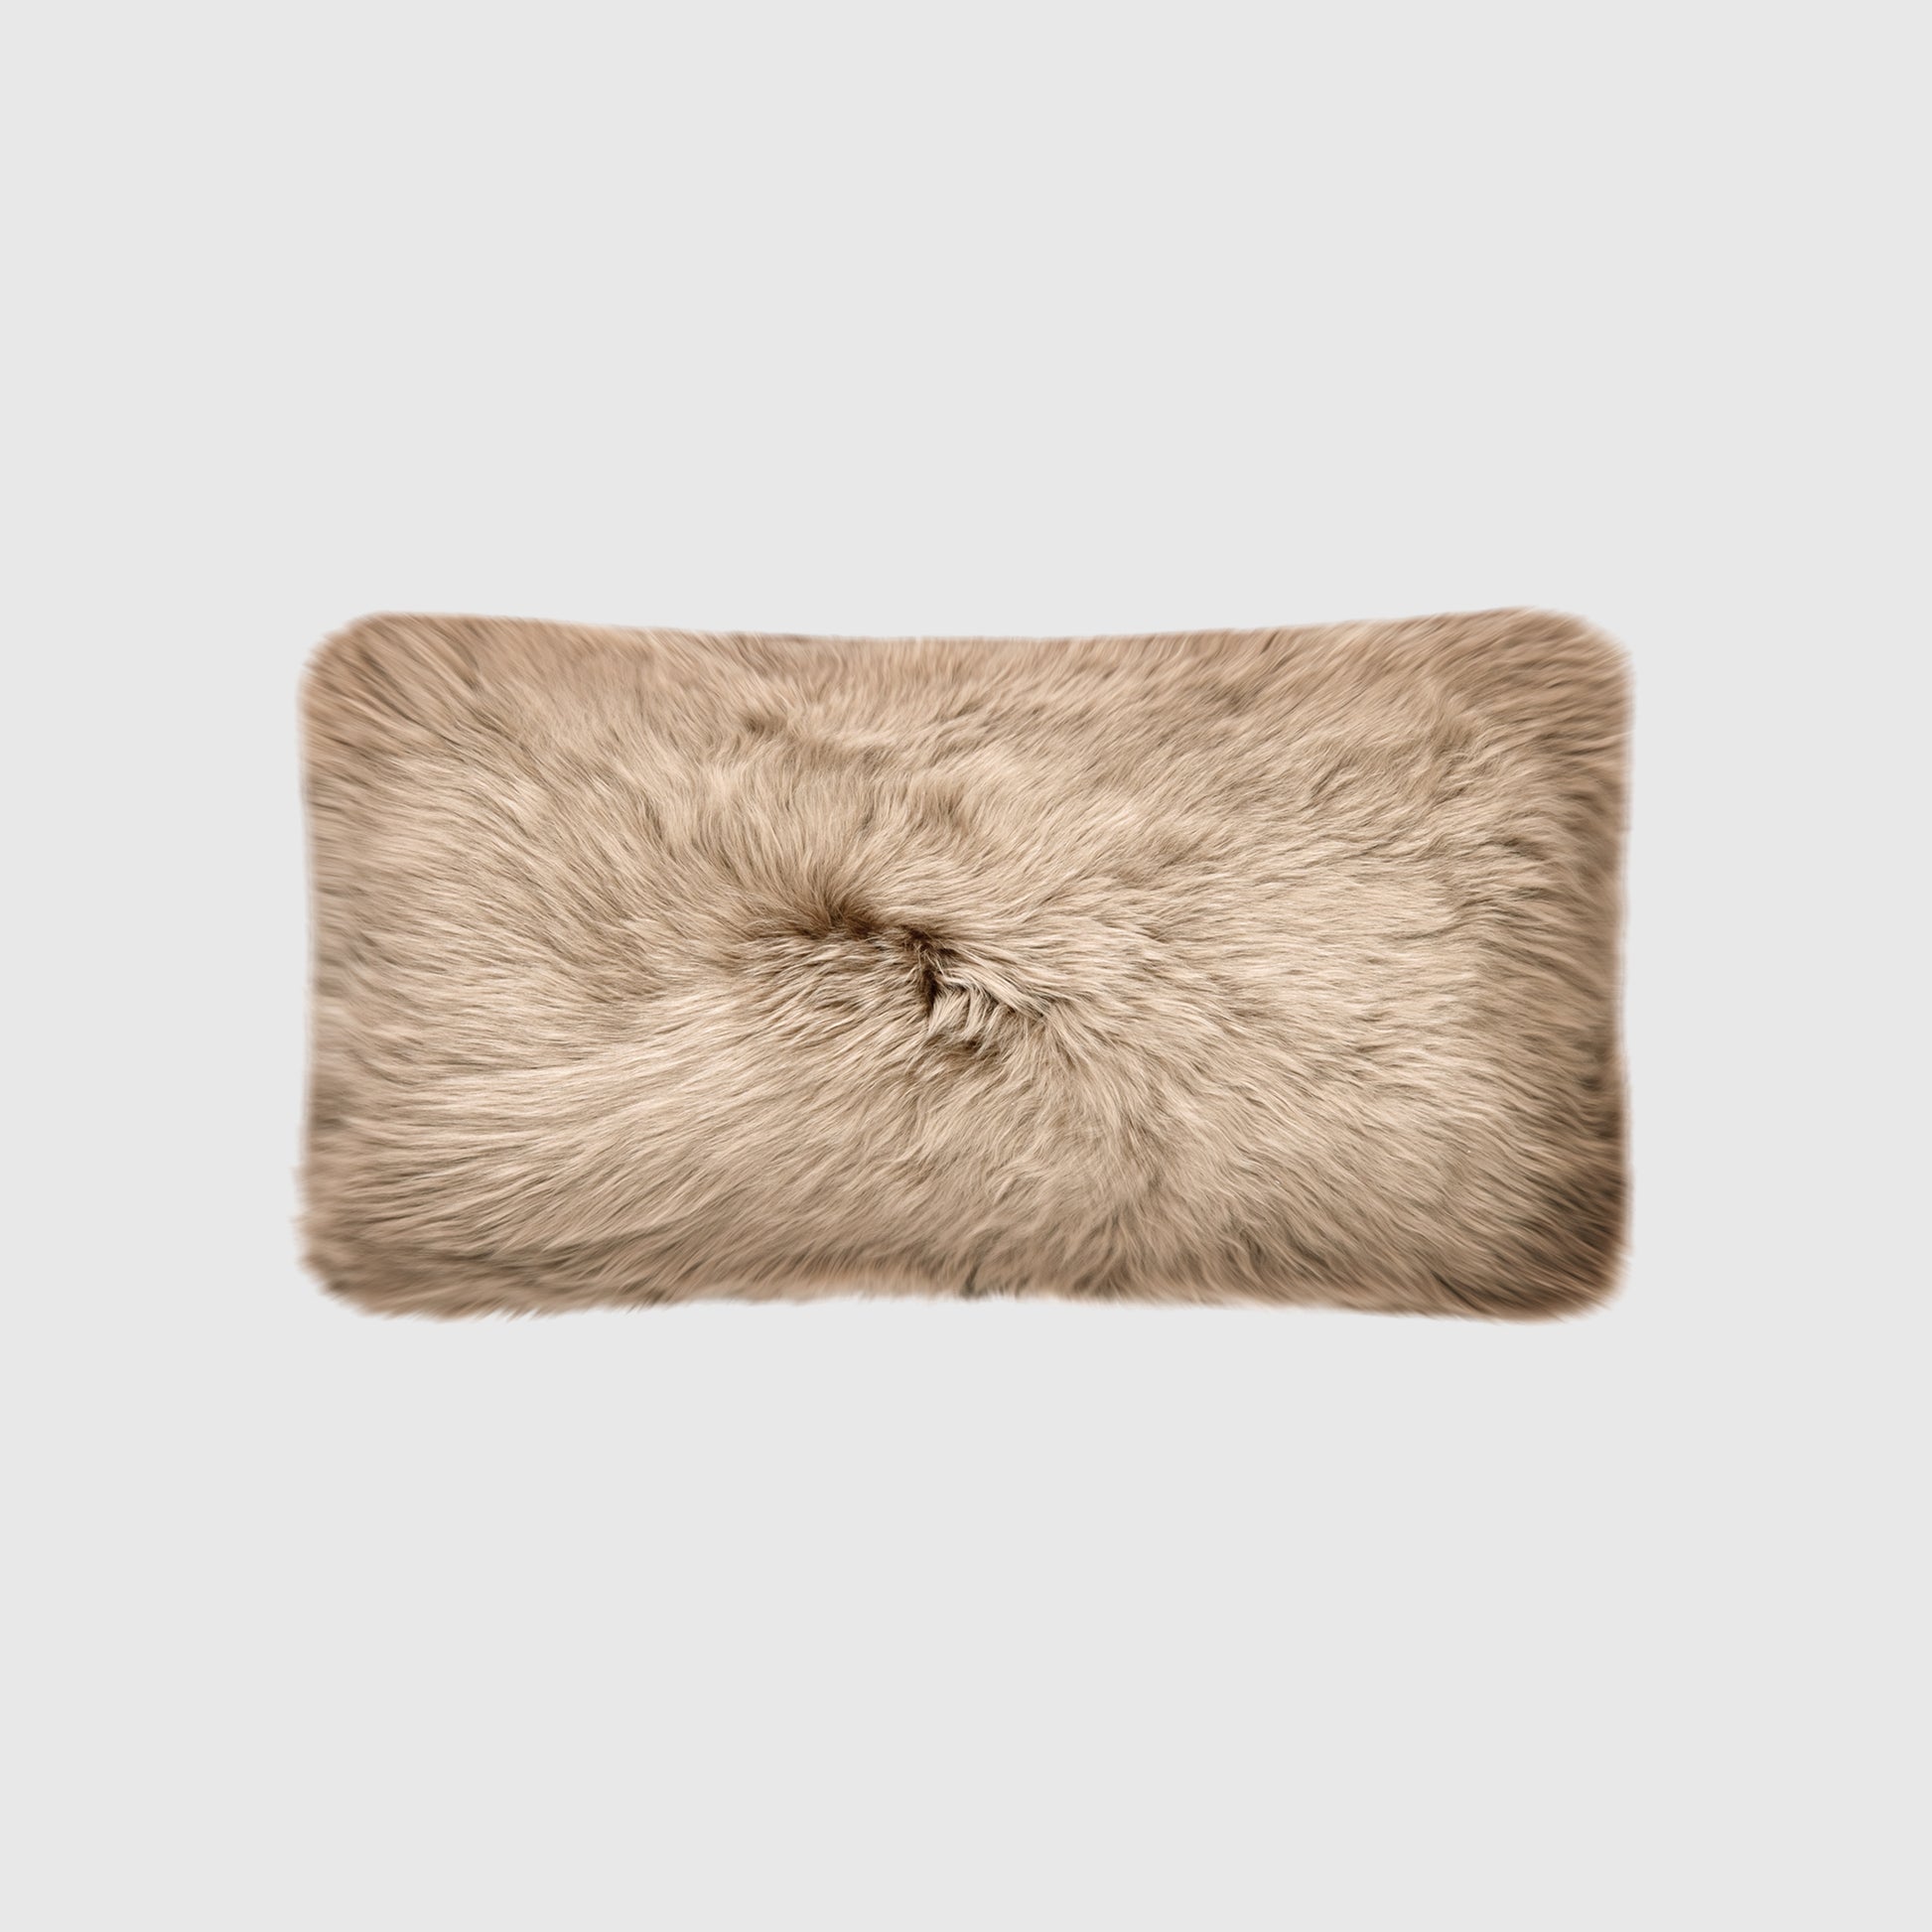 The Mood | Charlie Sheepskin Double-sided 12"x22" Pillow, Sand Brown